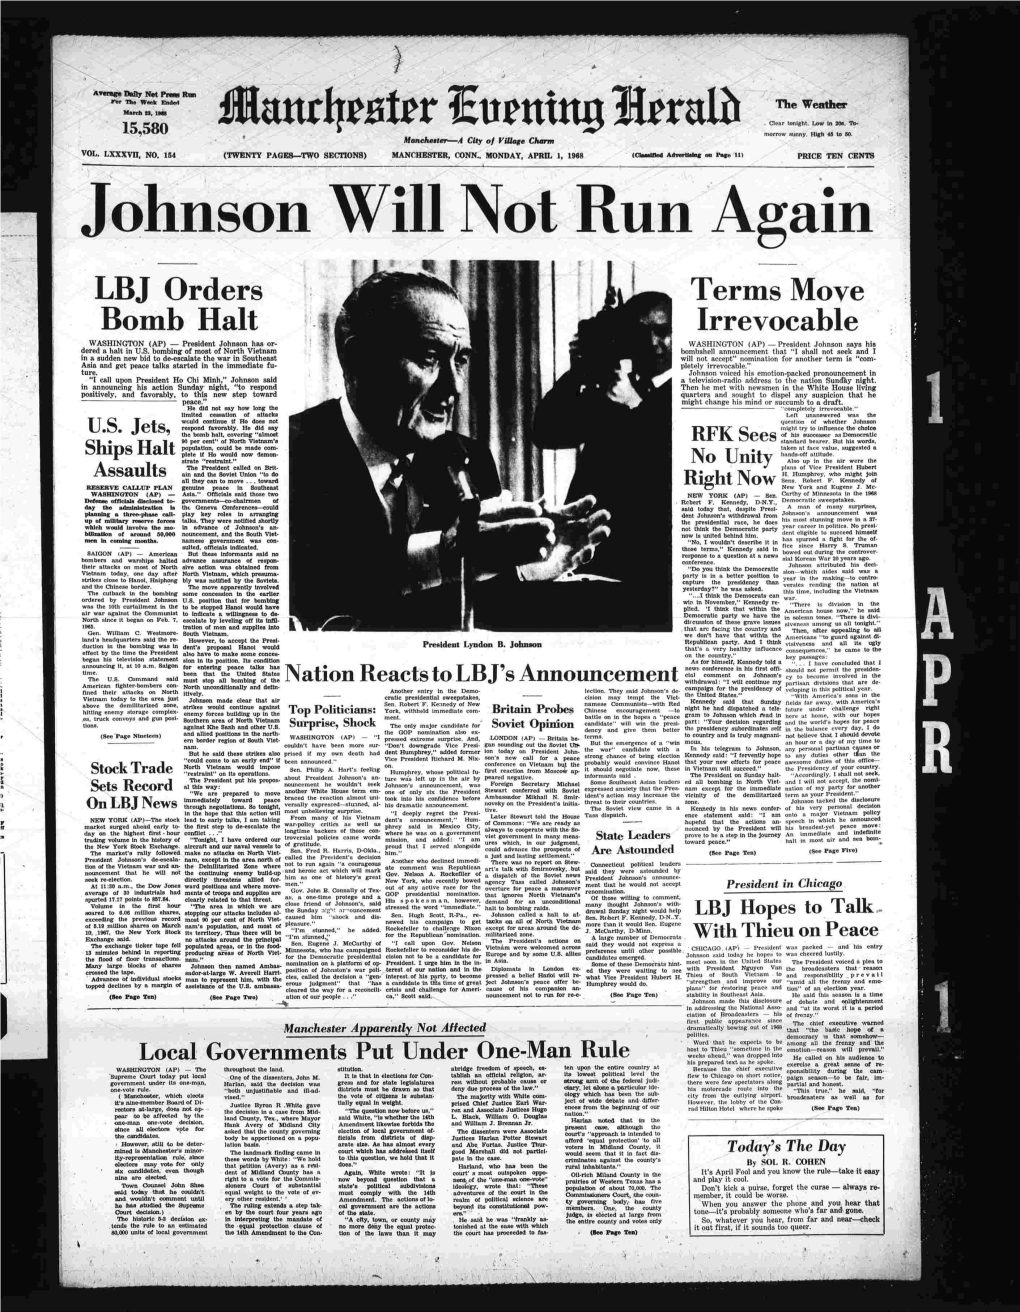 LBJ Orders Bomb Halt Terms Move Irrevocable